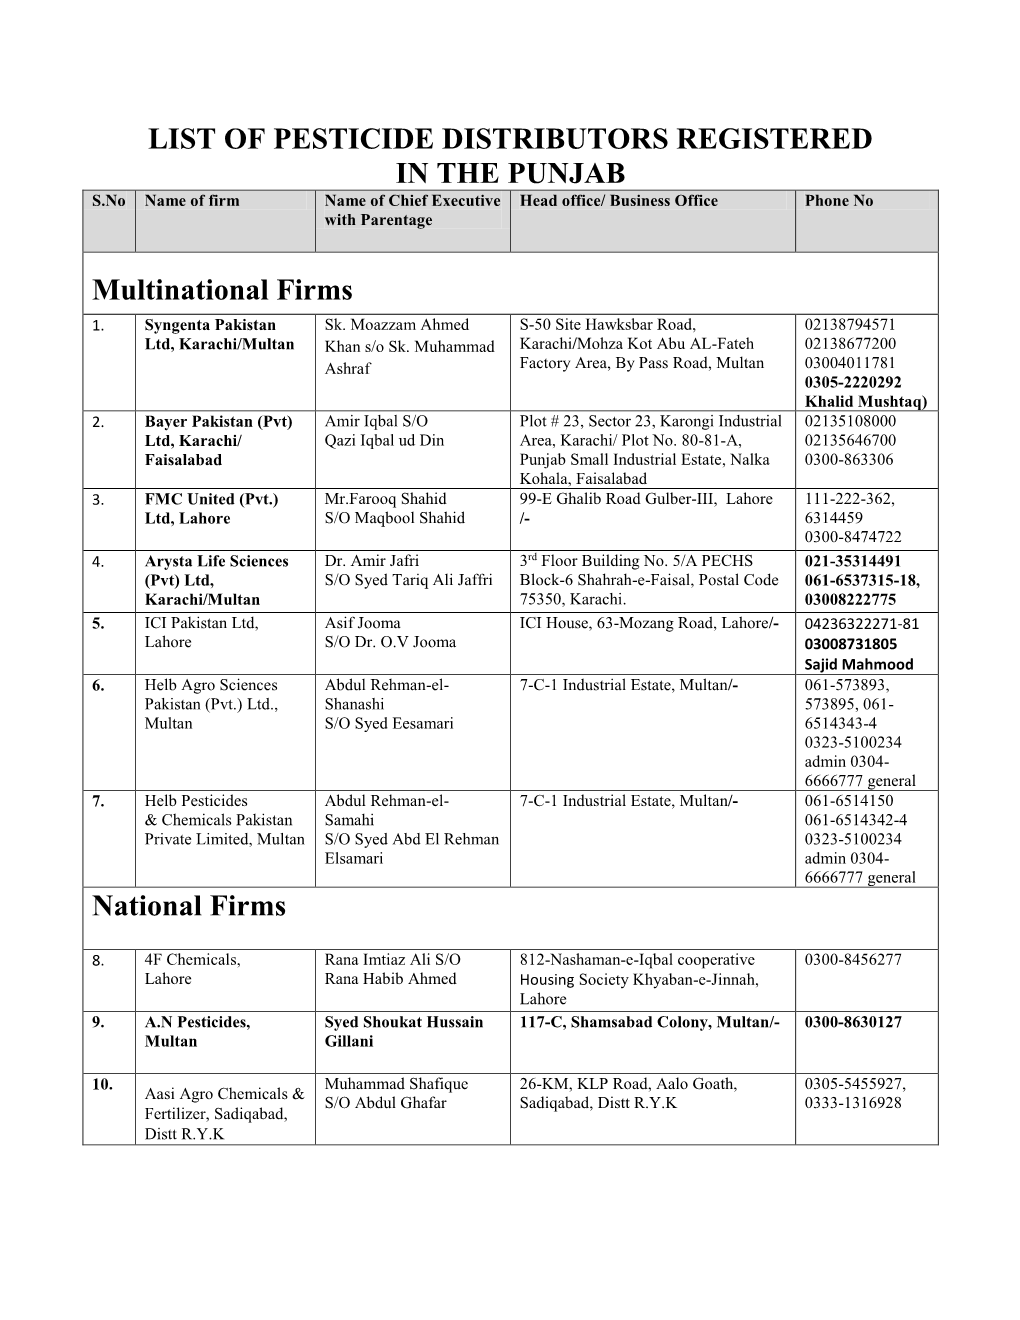 LIST of PESTICIDE DISTRIBUTORS REGISTERED in the PUNJAB S.No Name of Firm Name of Chief Executive Head Office/ Business Office Phone No with Parentage